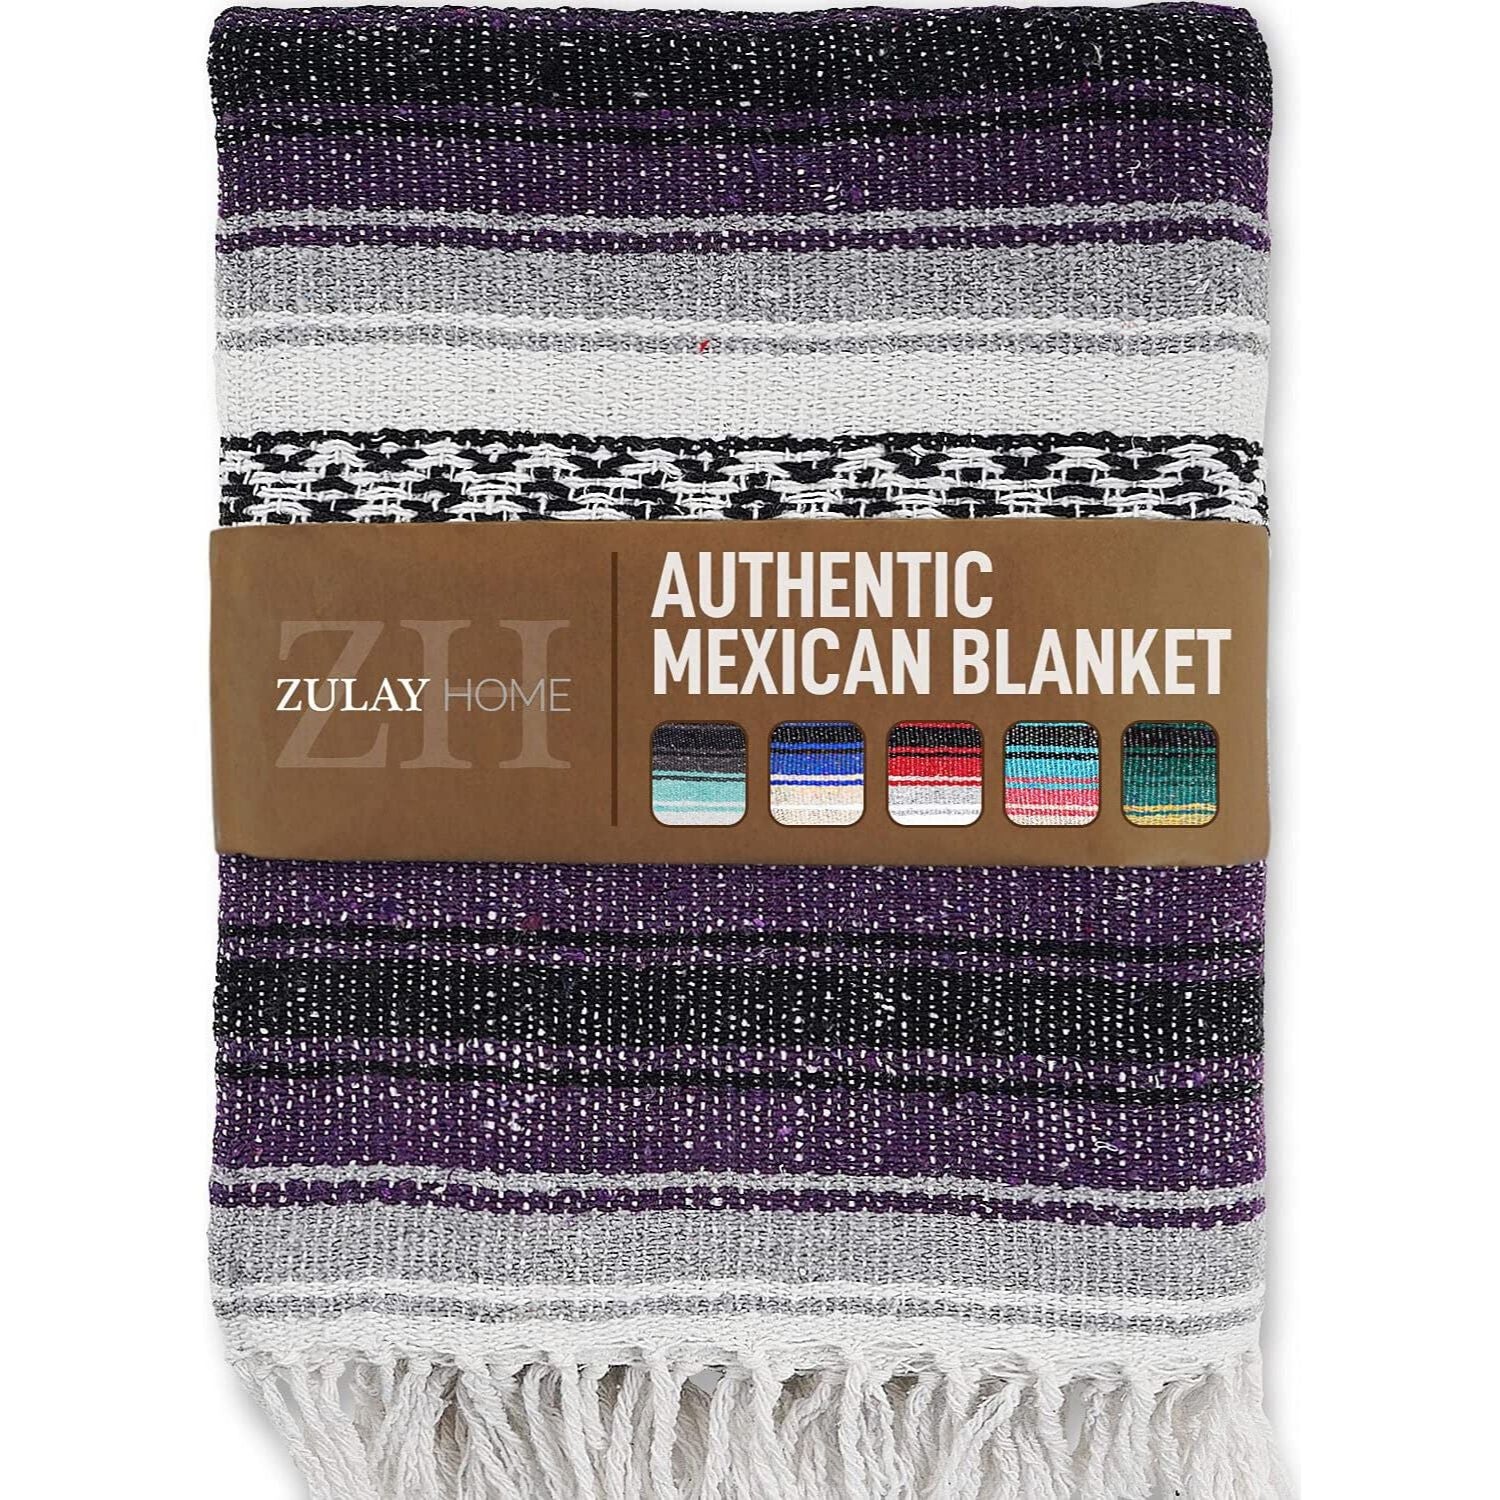 Zulay Home Authentic Mexican Blankets - Hand Woven Yoga Blanket & Outdoor Blanket